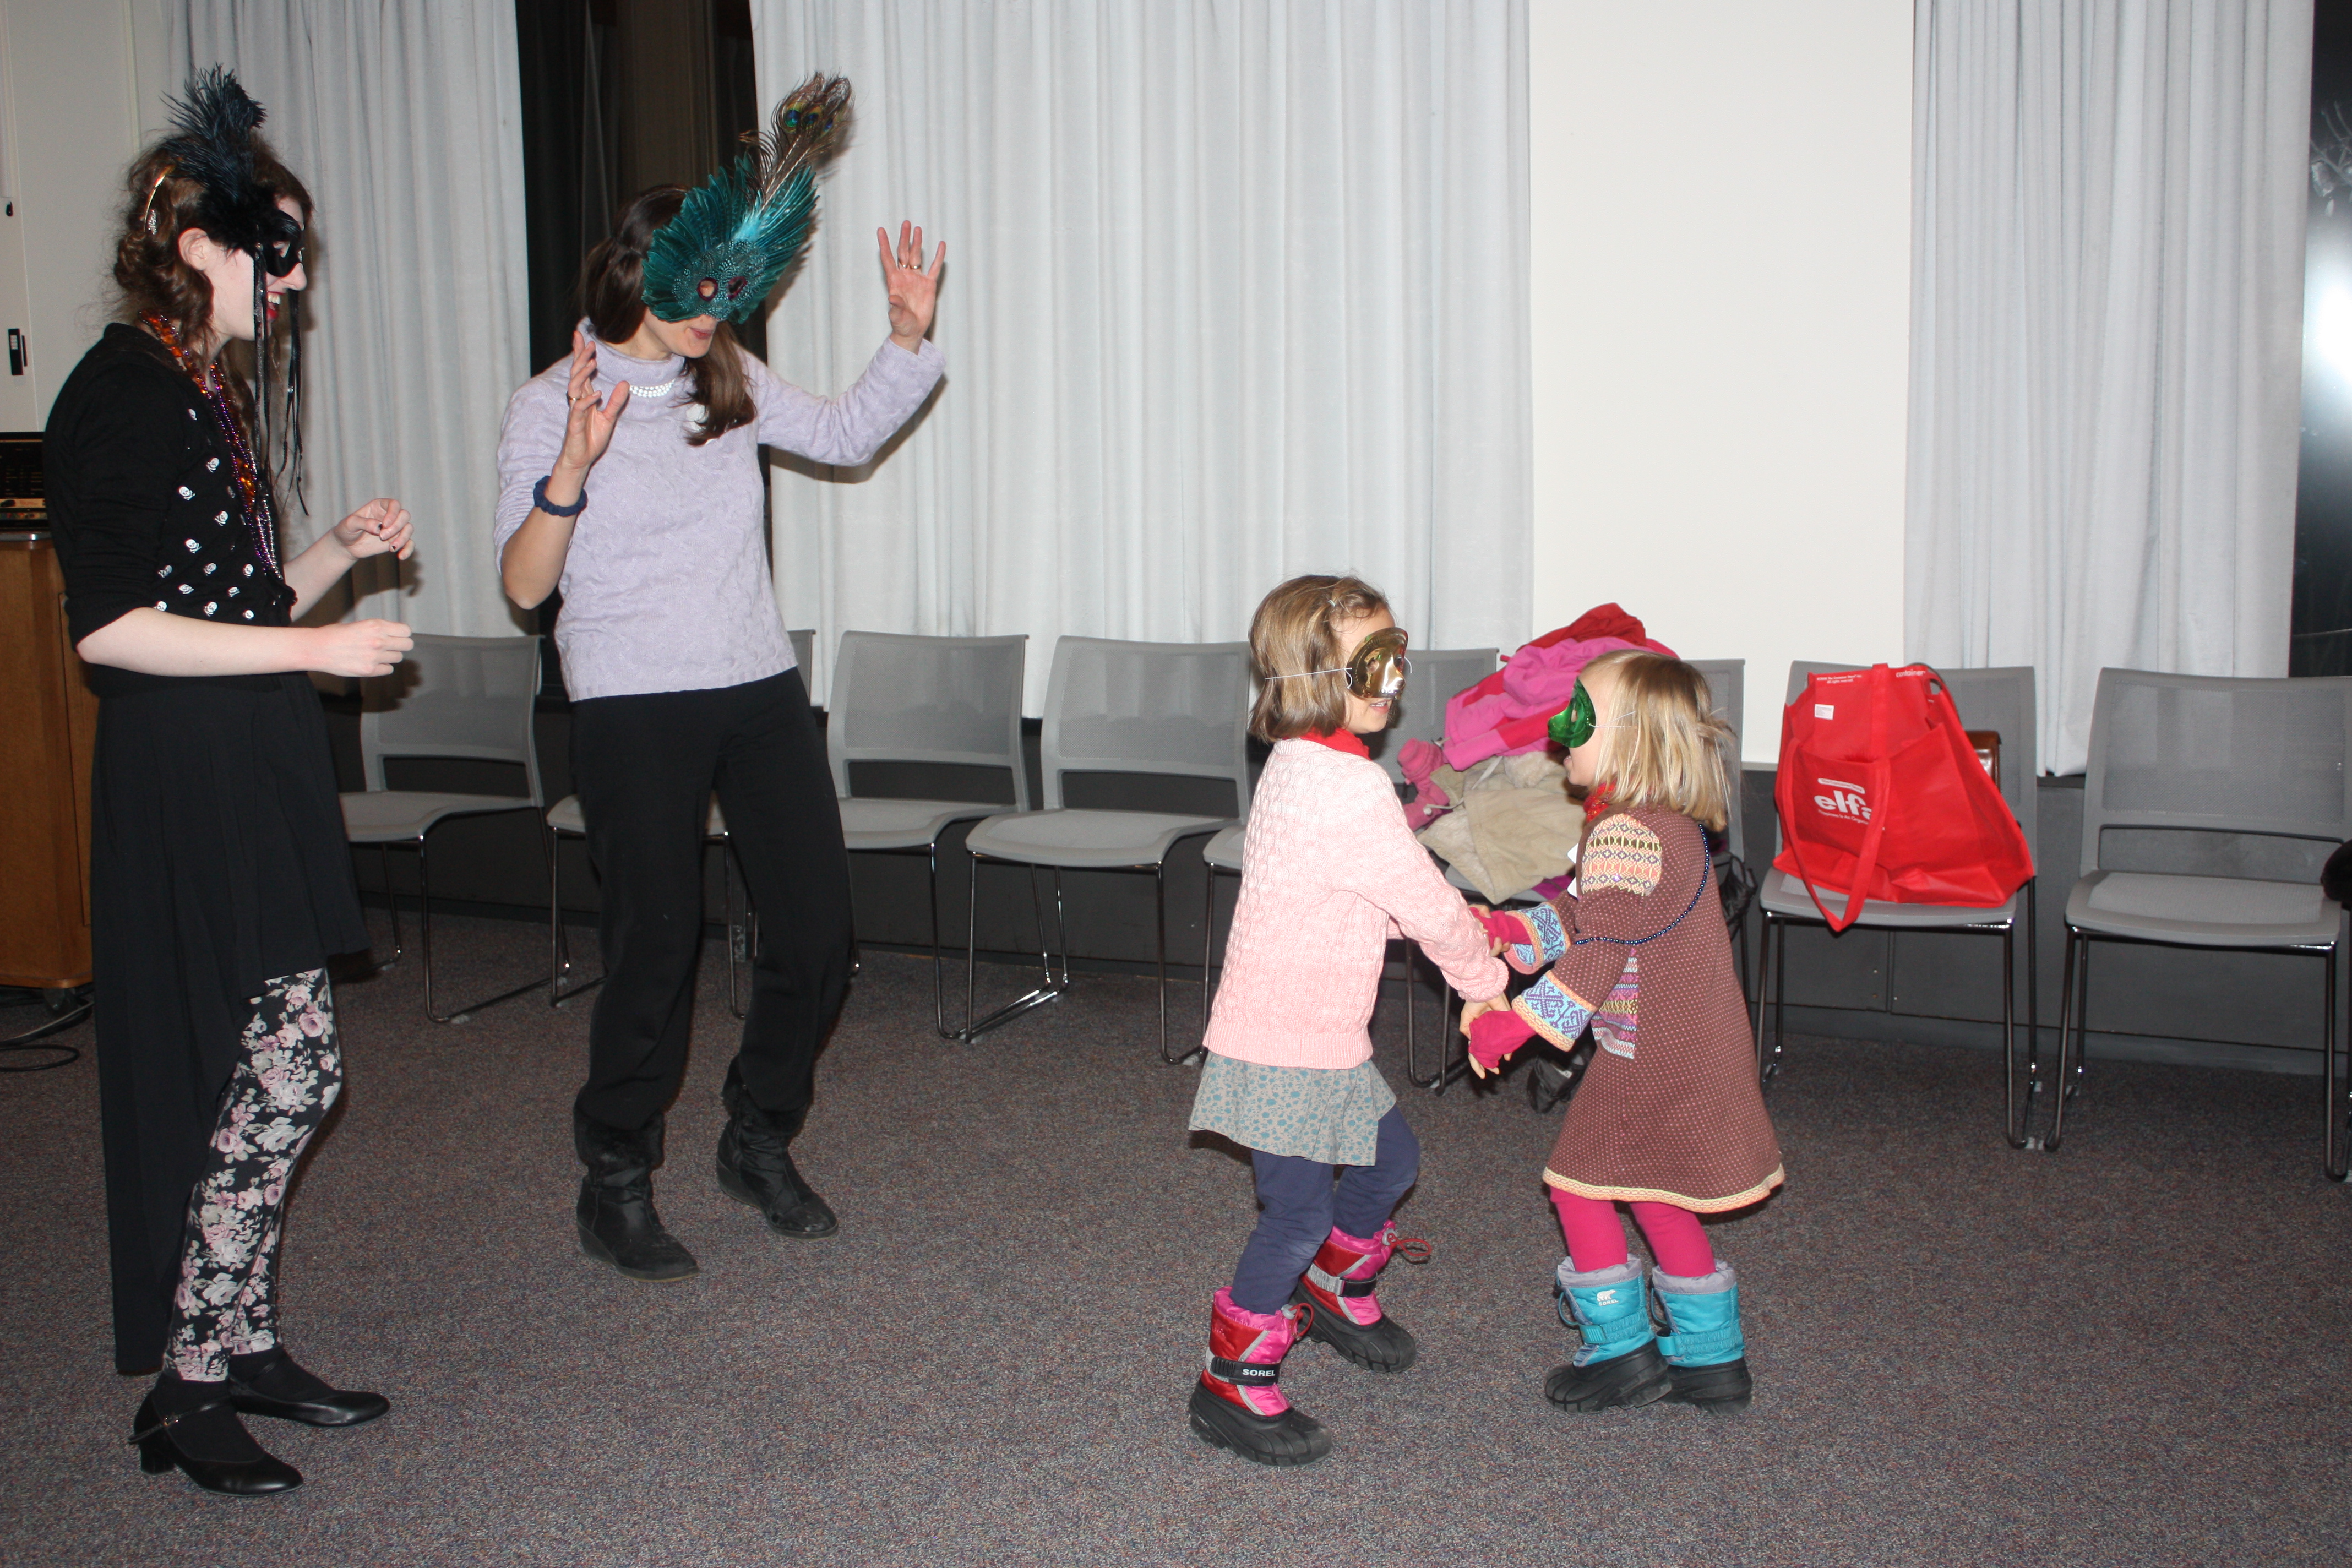 Professor Marianne Hopman and her daughters dance at the event